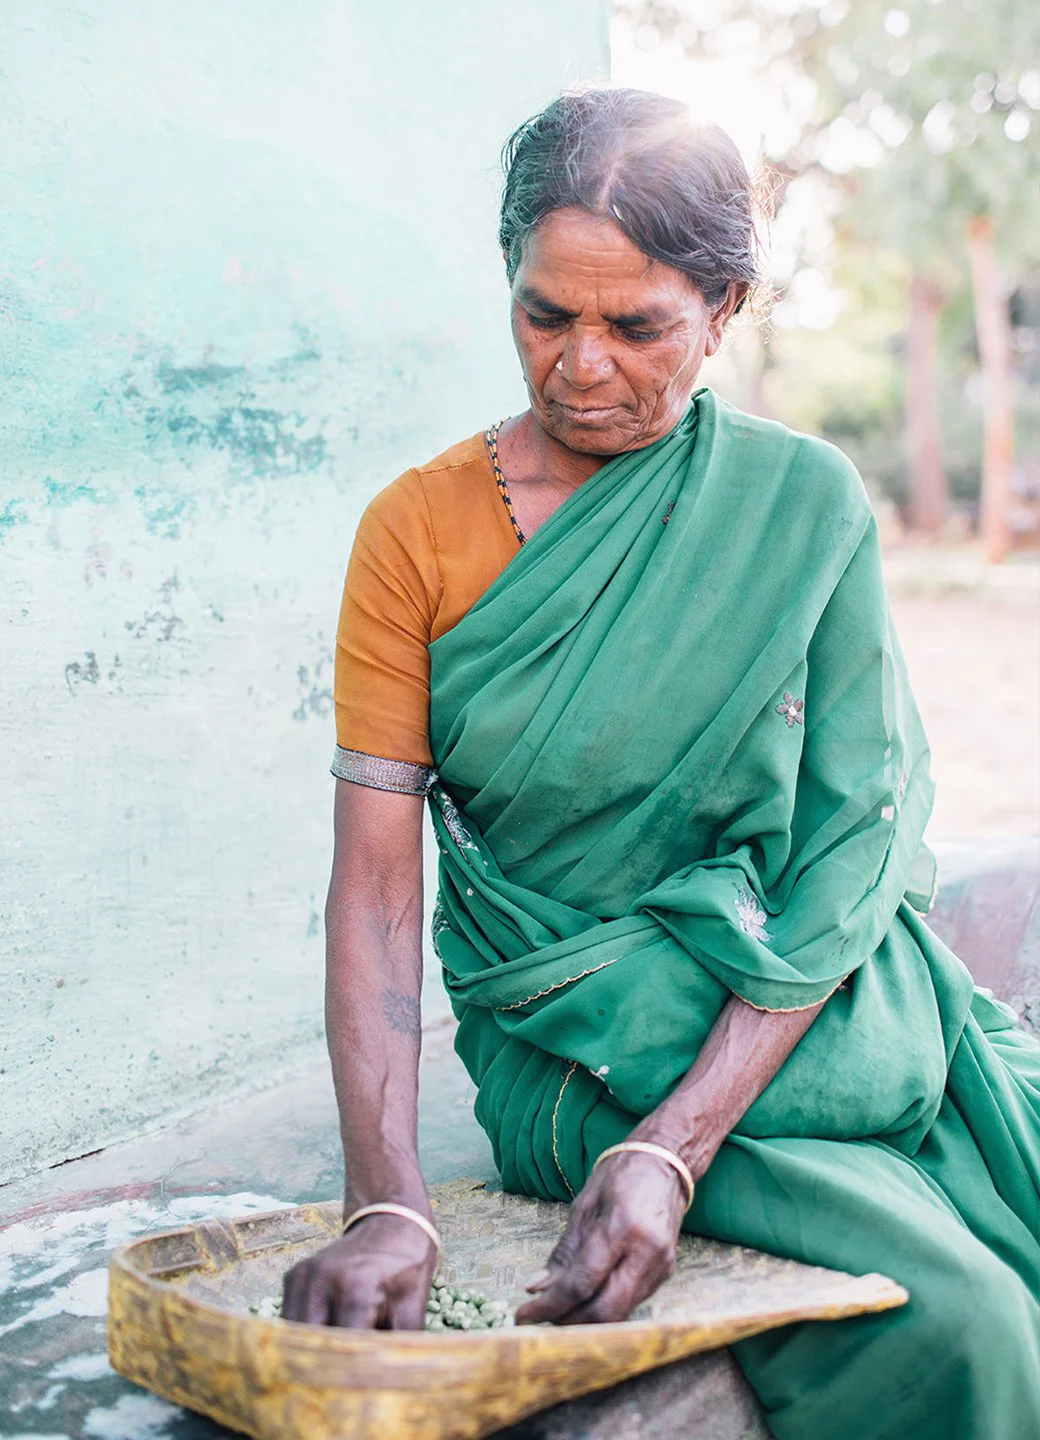 A woman works in a town near Mysore, India